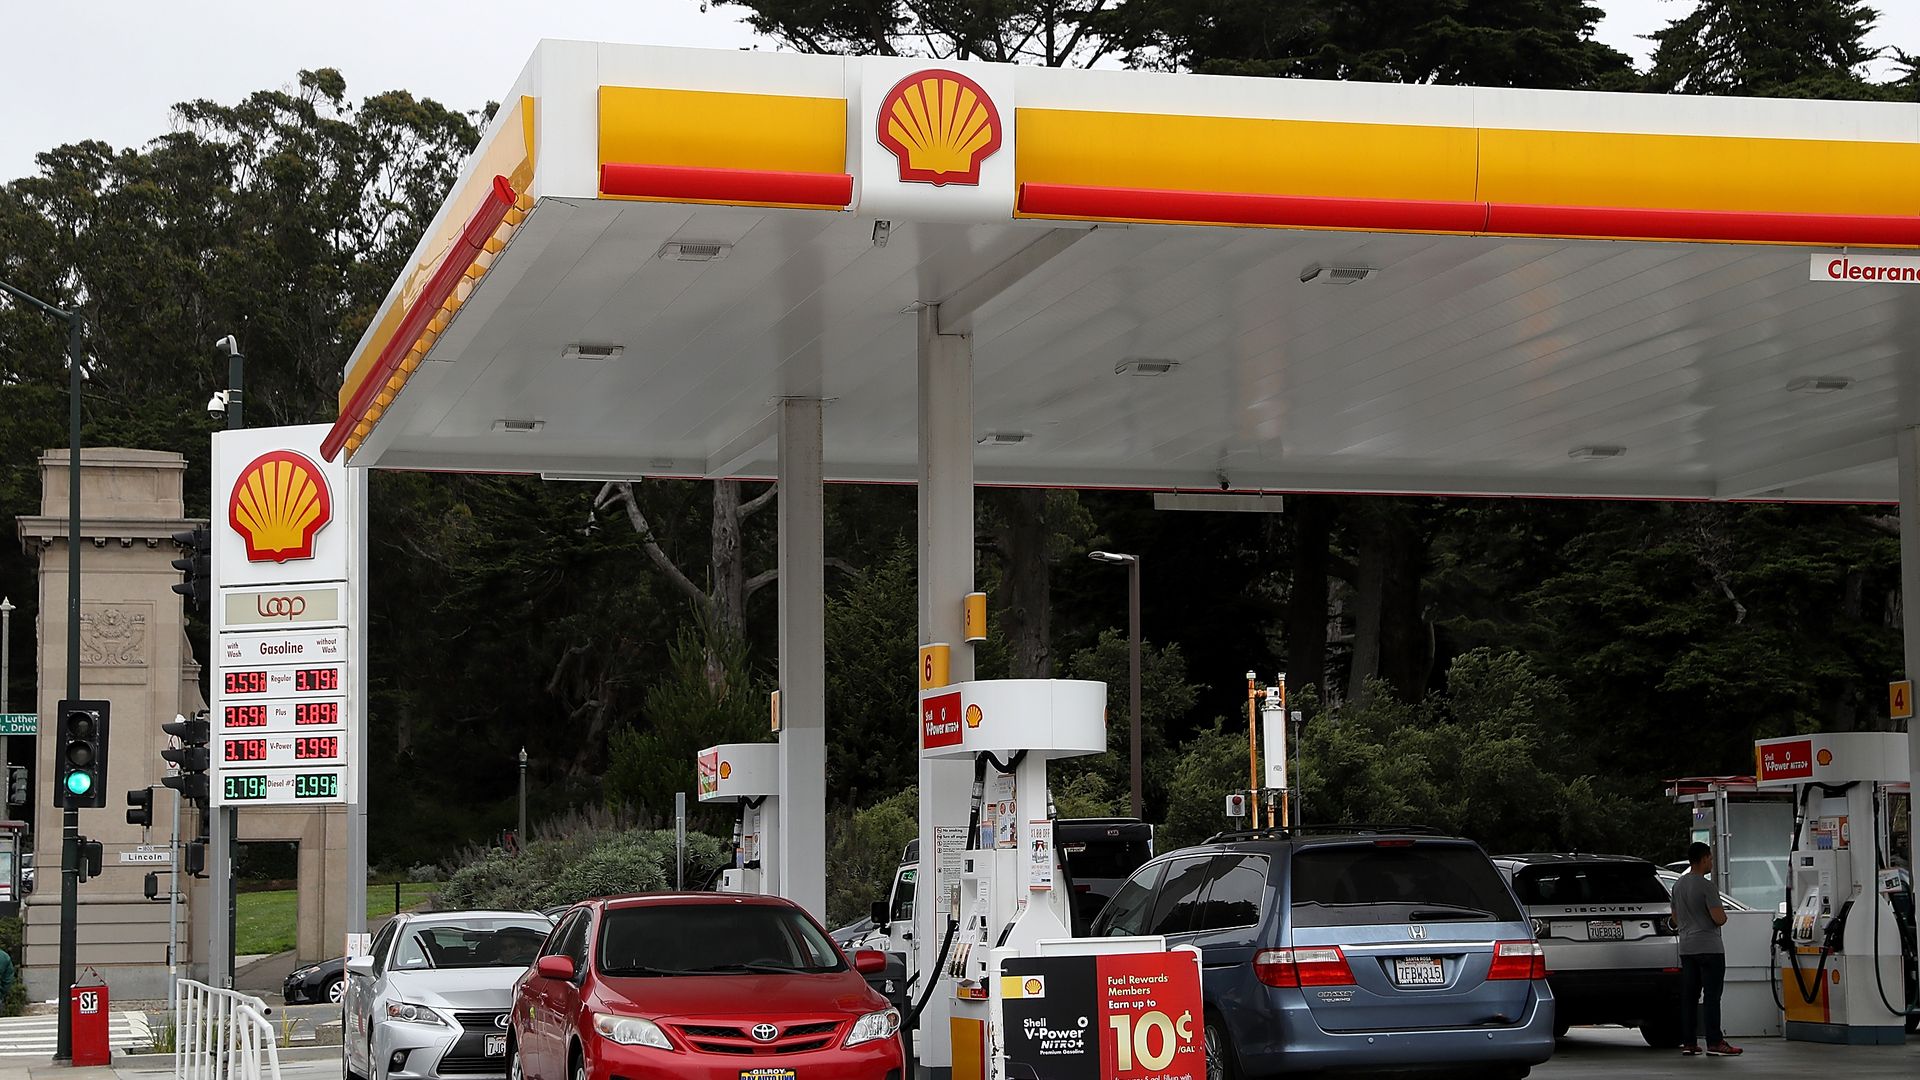 The Shell logo is displayed at a Shell gas station on July 26, 2018 in San Francisco, California.